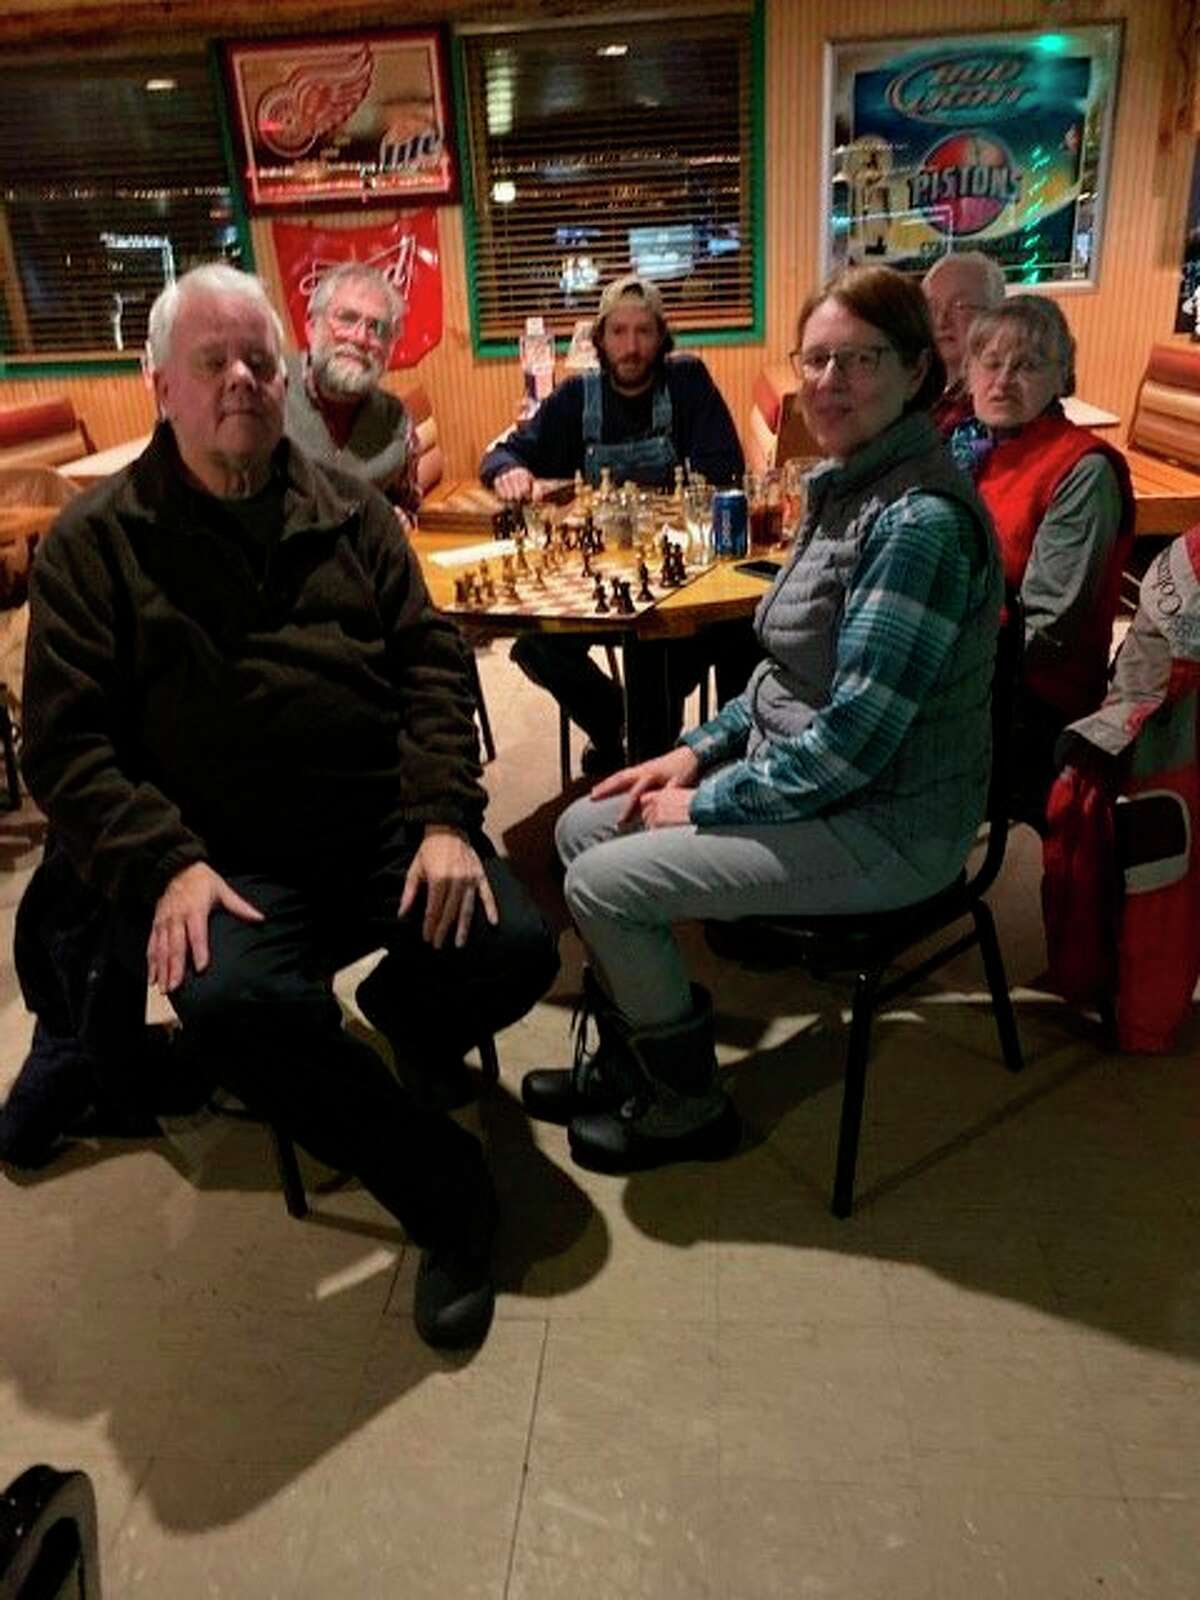 Chess players meet in competition at 6 p.m. every Tuesday at Barski, 4016 M-37, two miles north of Baldwin, and every Wednesday at 5 p.m. in Irons at Jackie's Place, 6016 W. 10 1/2 Mile Rd. Pictured from left are John Kuderski, of Brethern; Dave Gendler, Joshua Elie and Linda Schulman, of Irons; and George and Rose McLaughlin of Manistee. (Submitted photo)